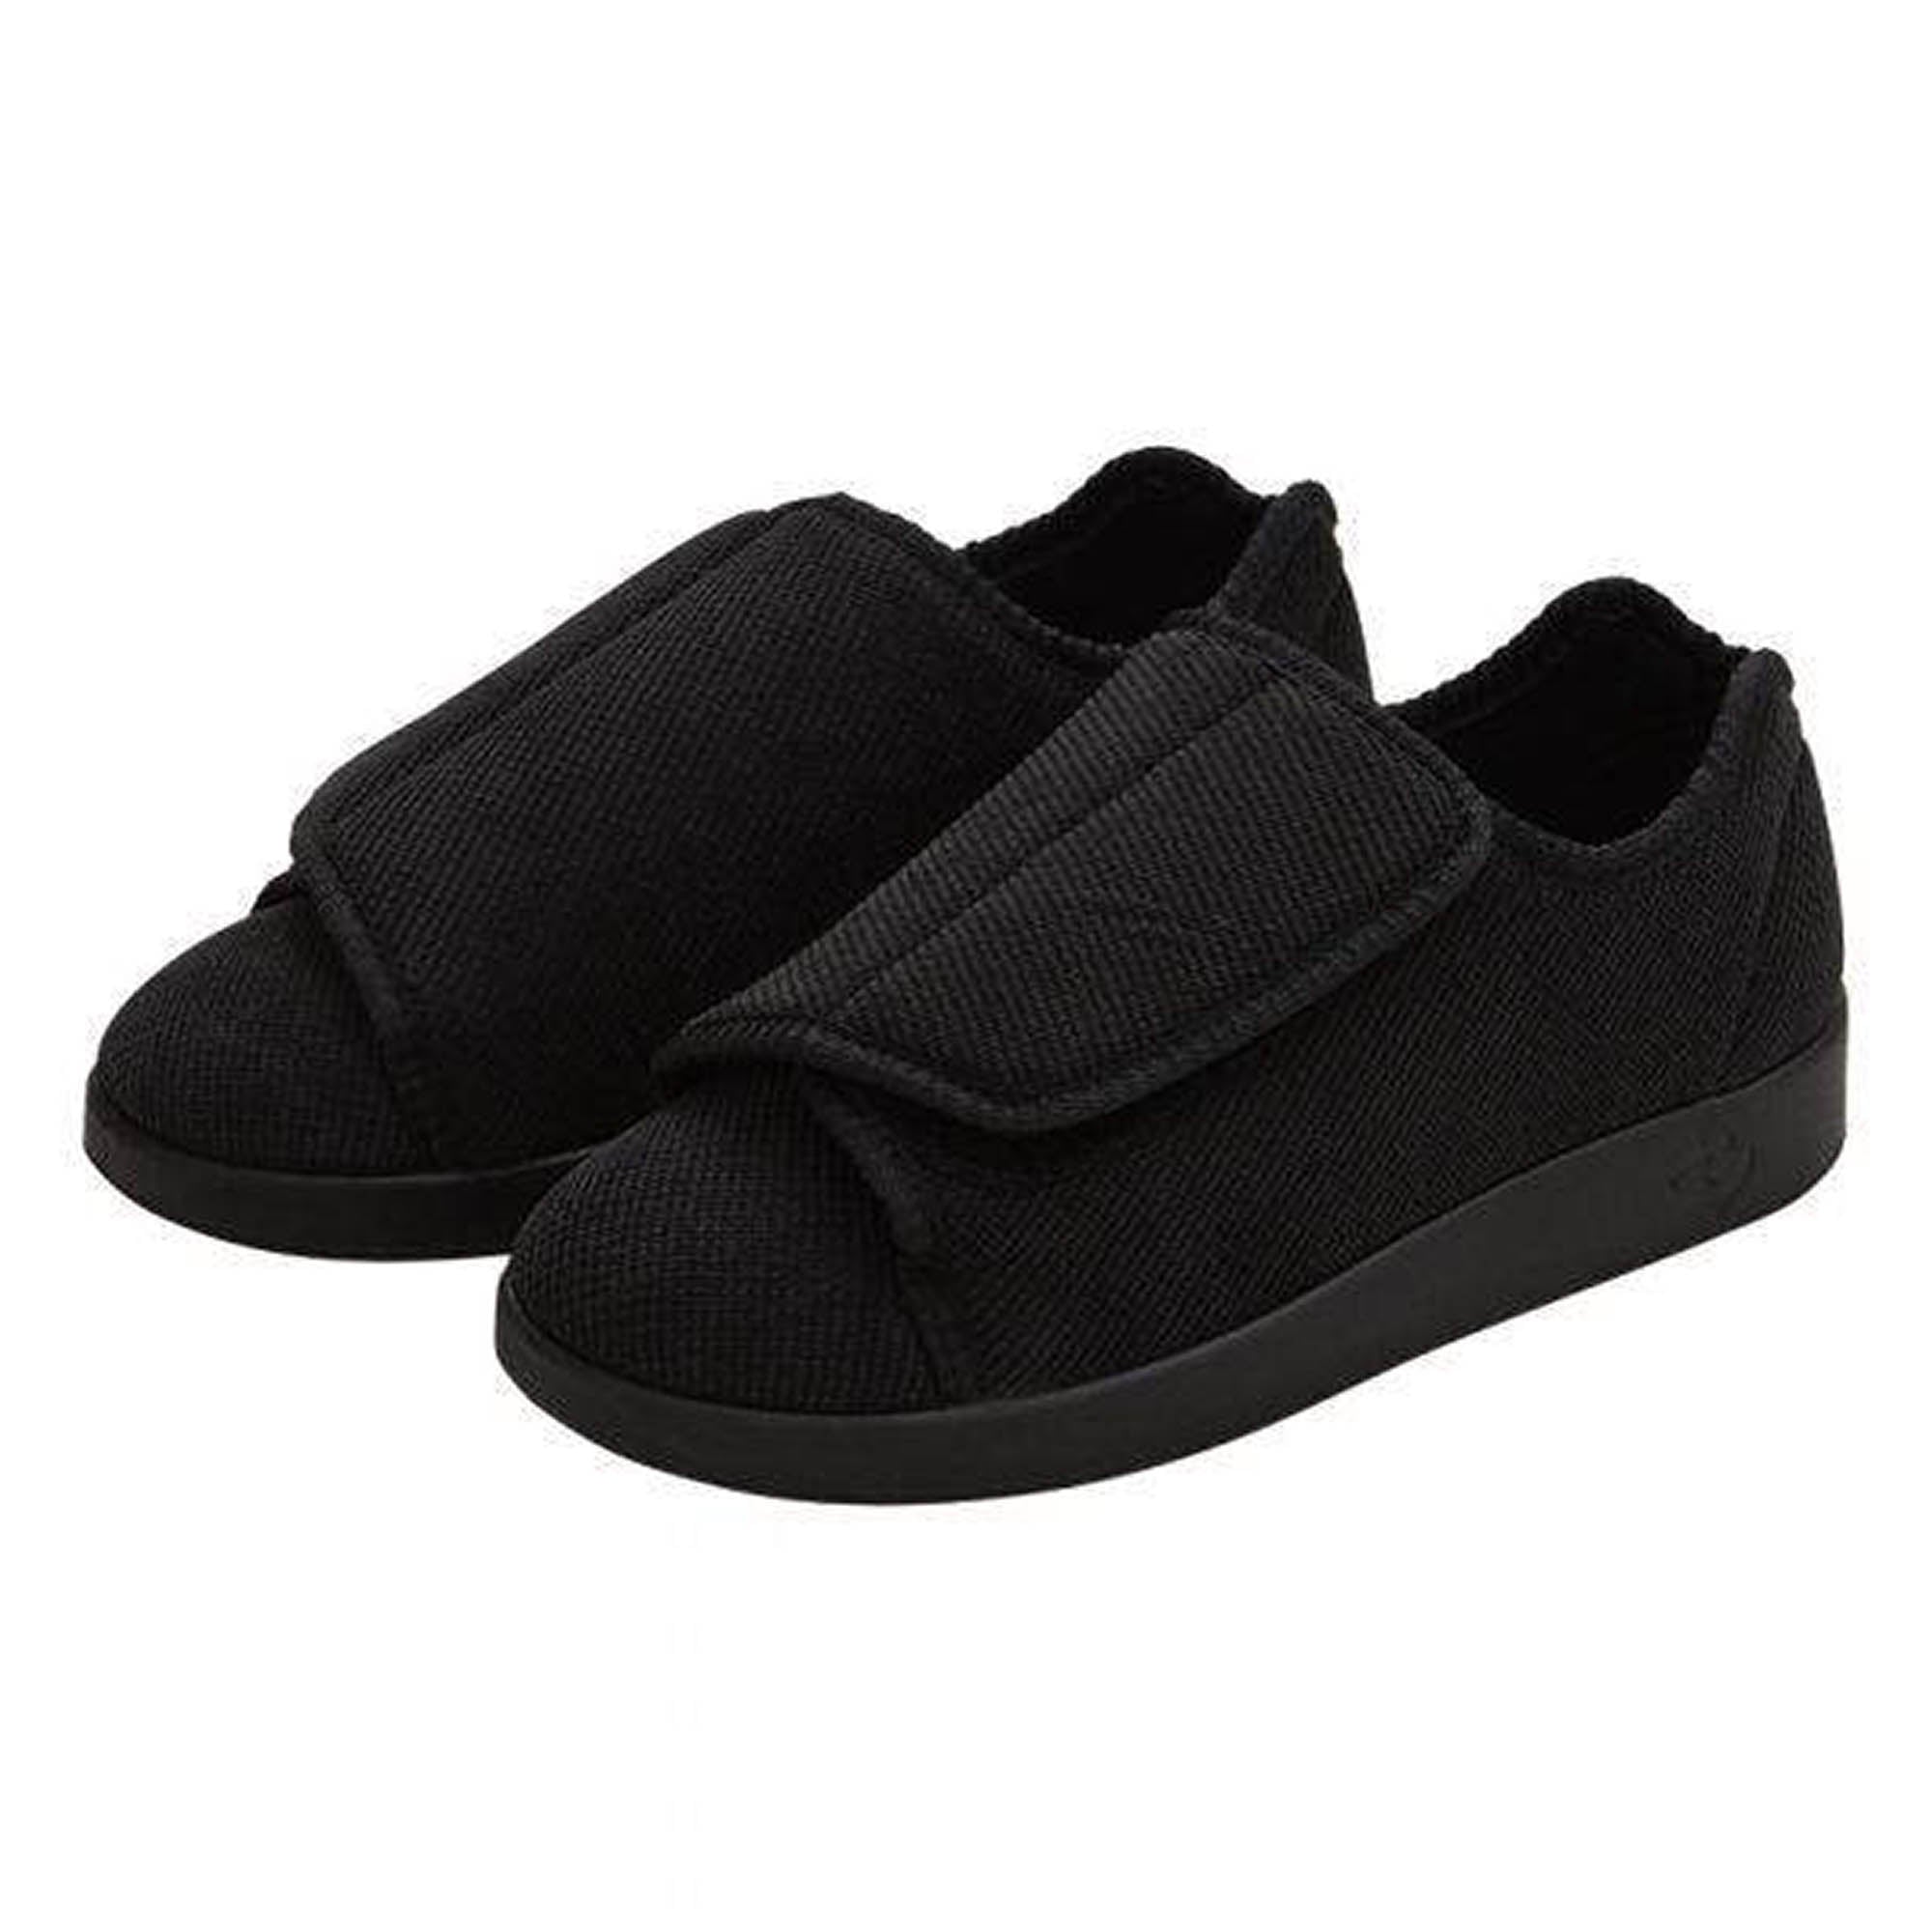 Silverts Women's Antimicrobial Extra Extra Wide Easy-Closure Slippers - Black - 7